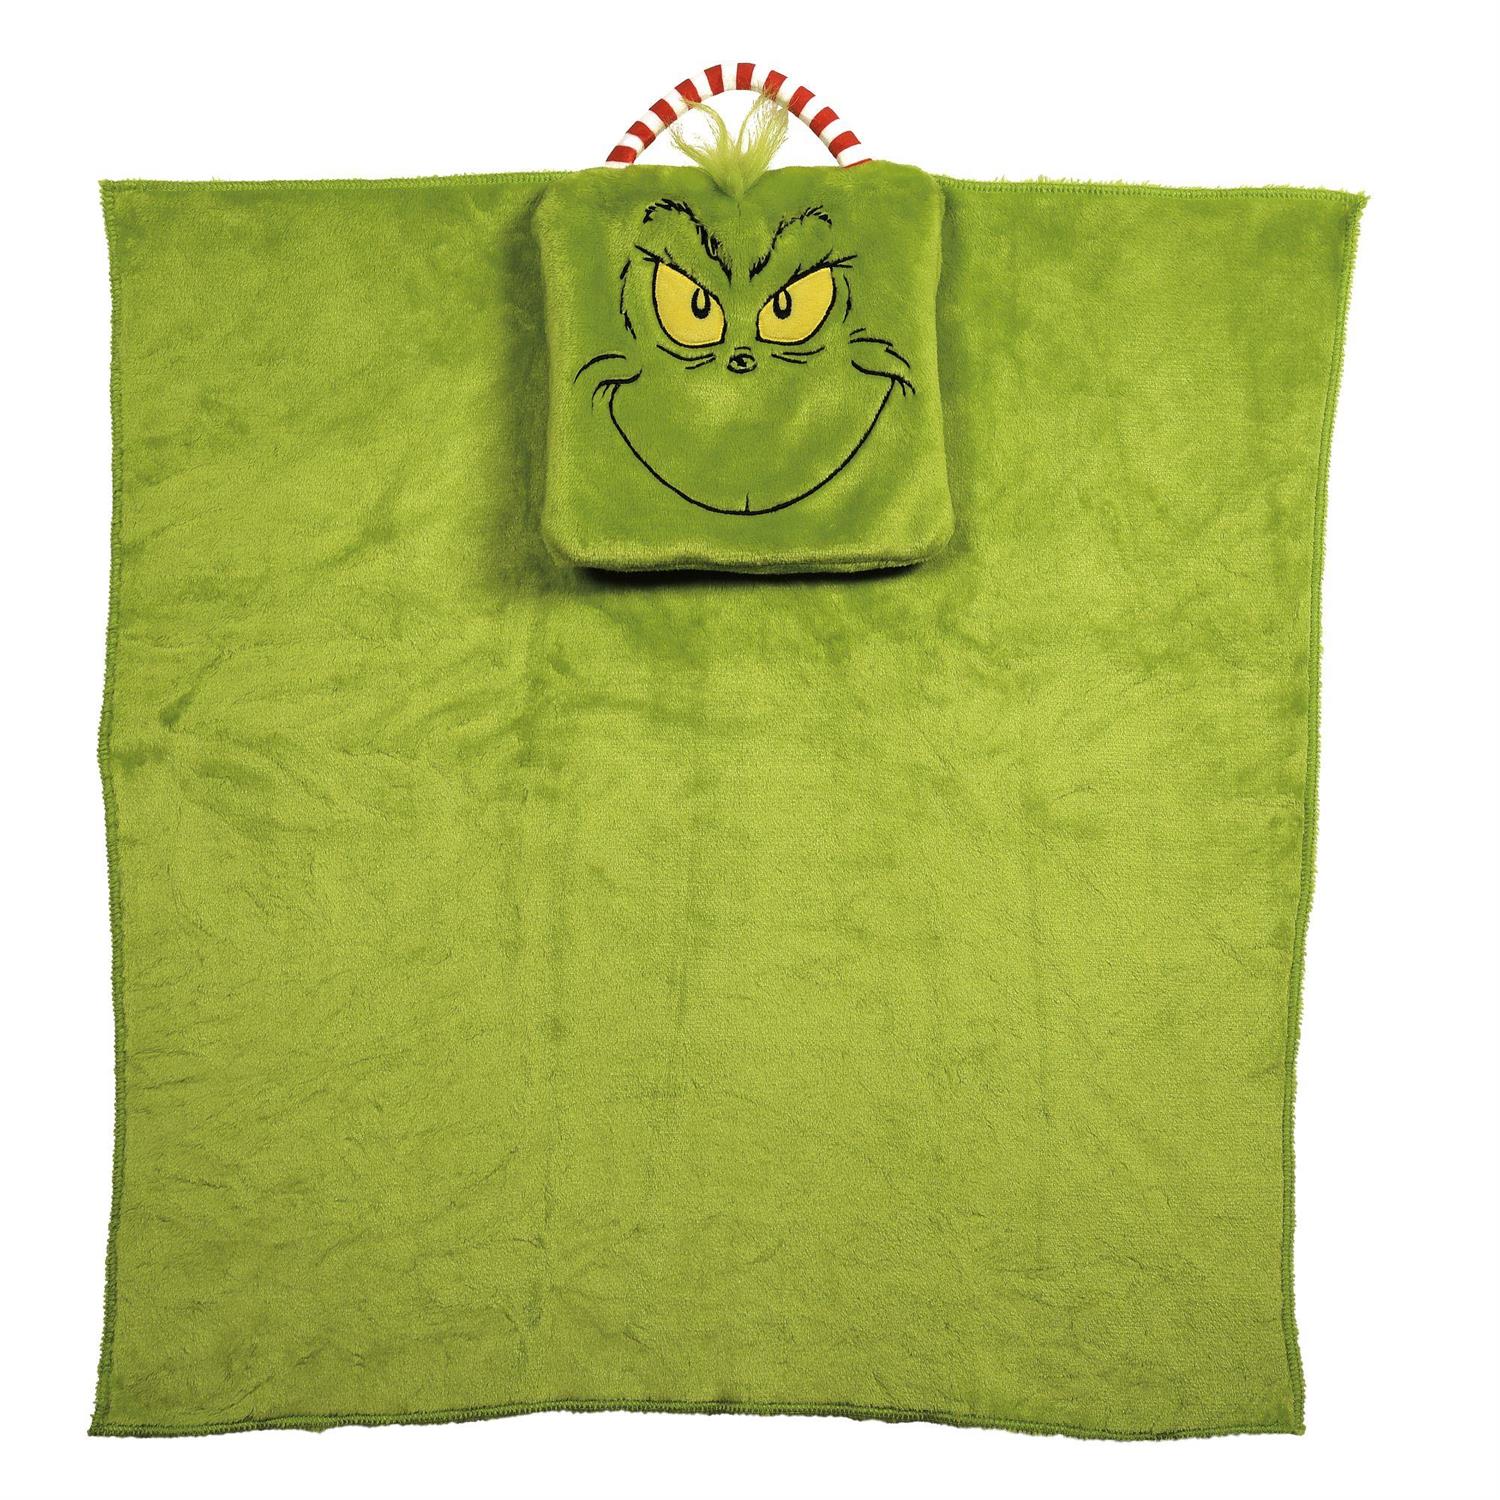 The Grinch's Travel Baby Blanket